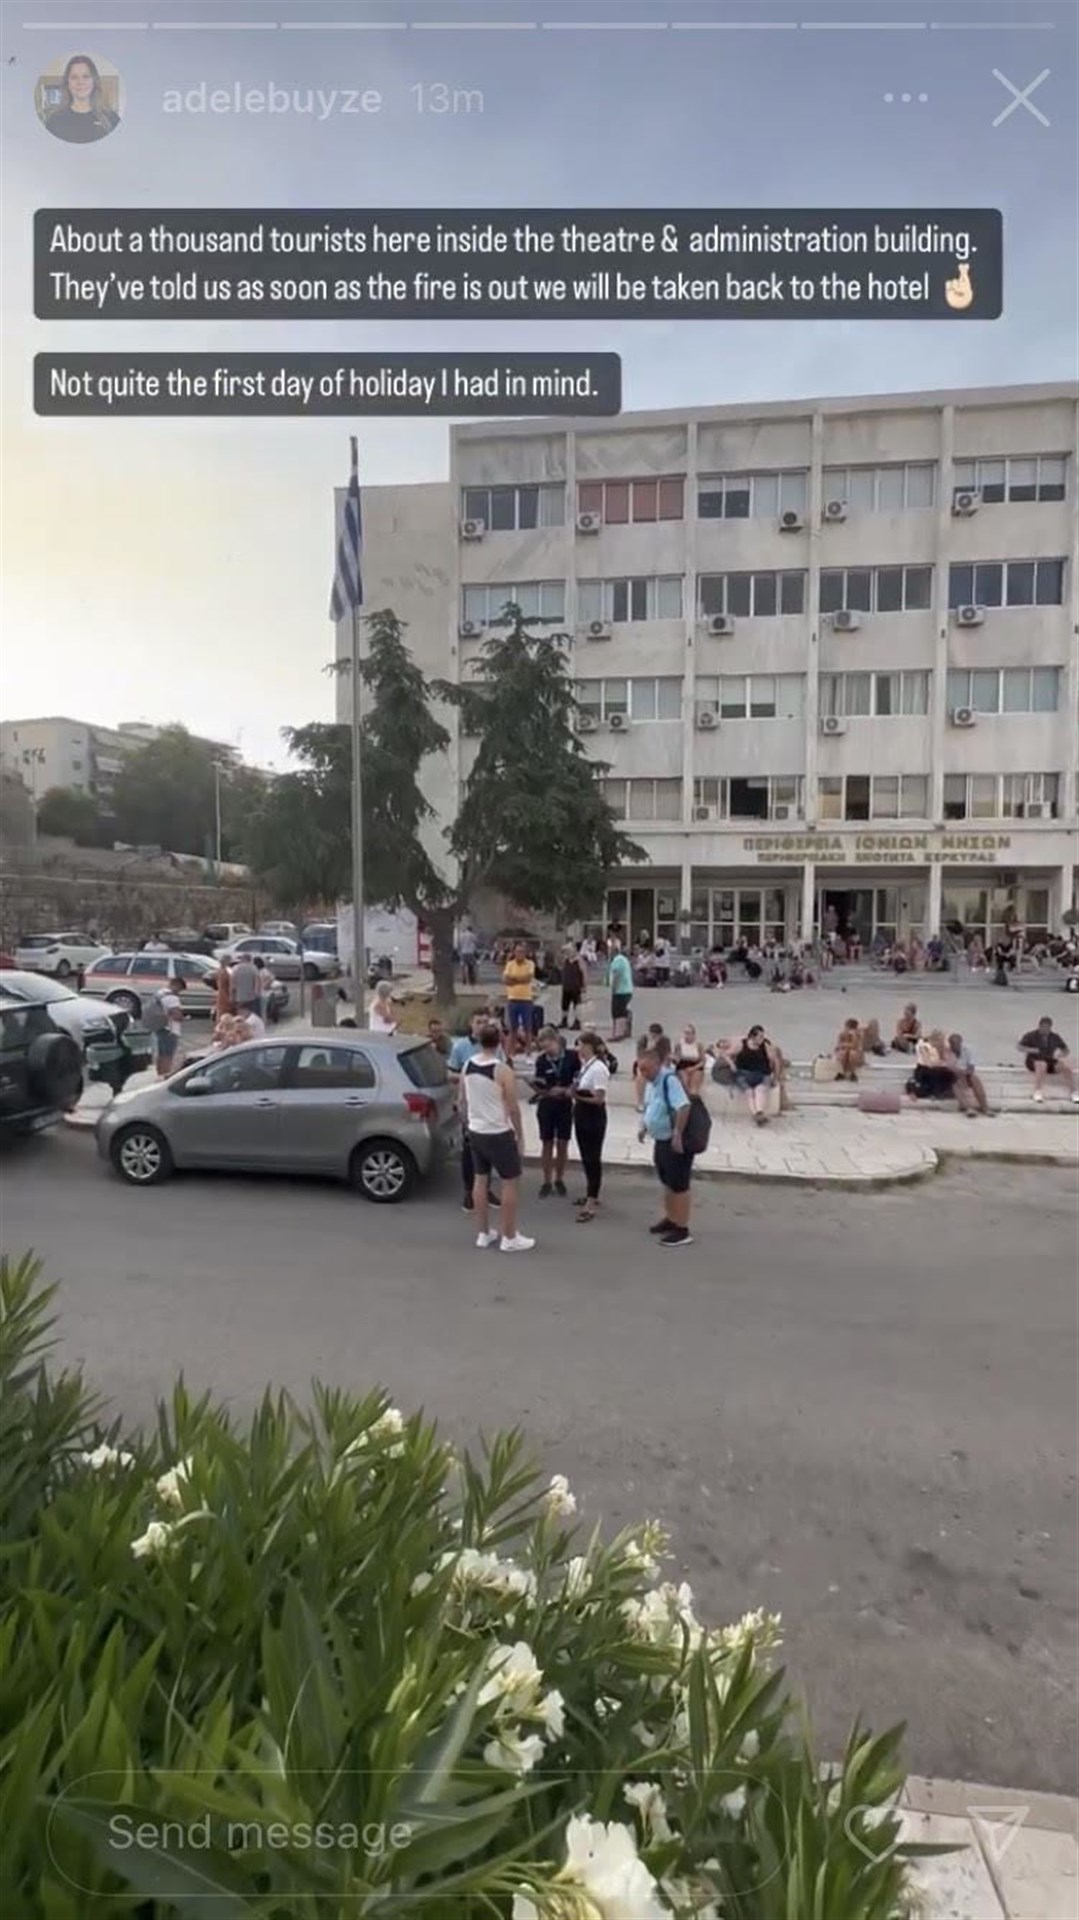 Scenes from the Corfu theatre where evacuated visitors and residents congregated. Instagram post by Adele Buyze.